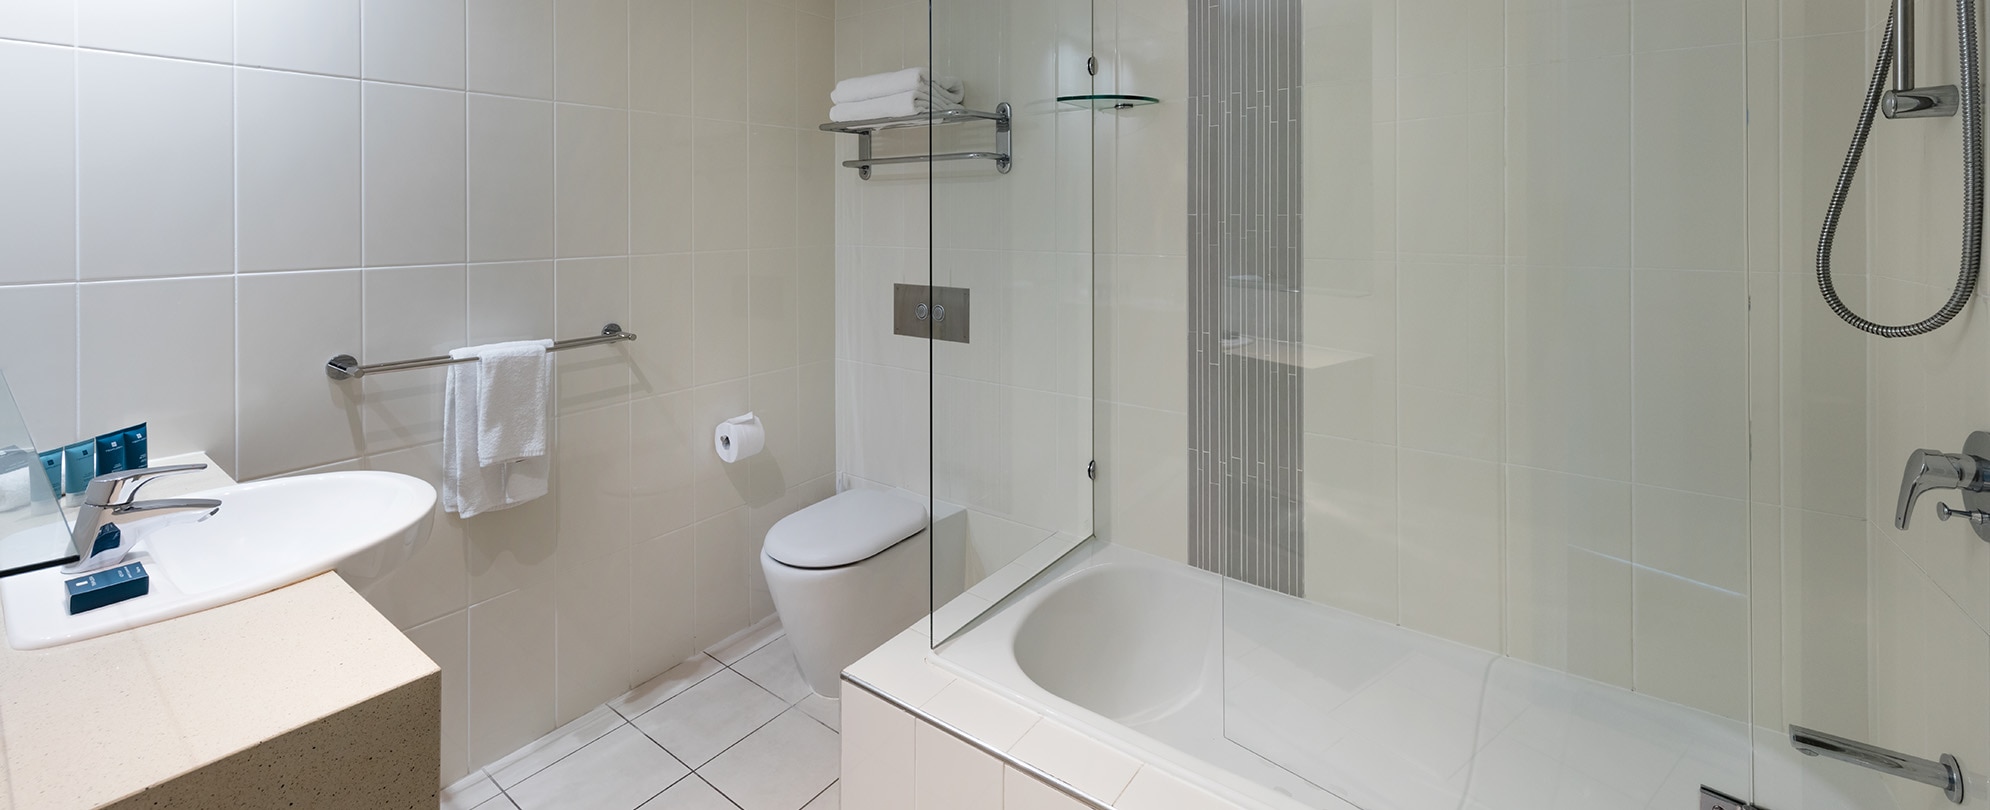 A bathroom in a 2-bedroom suite at Club Wyndham Surfers Paradise.